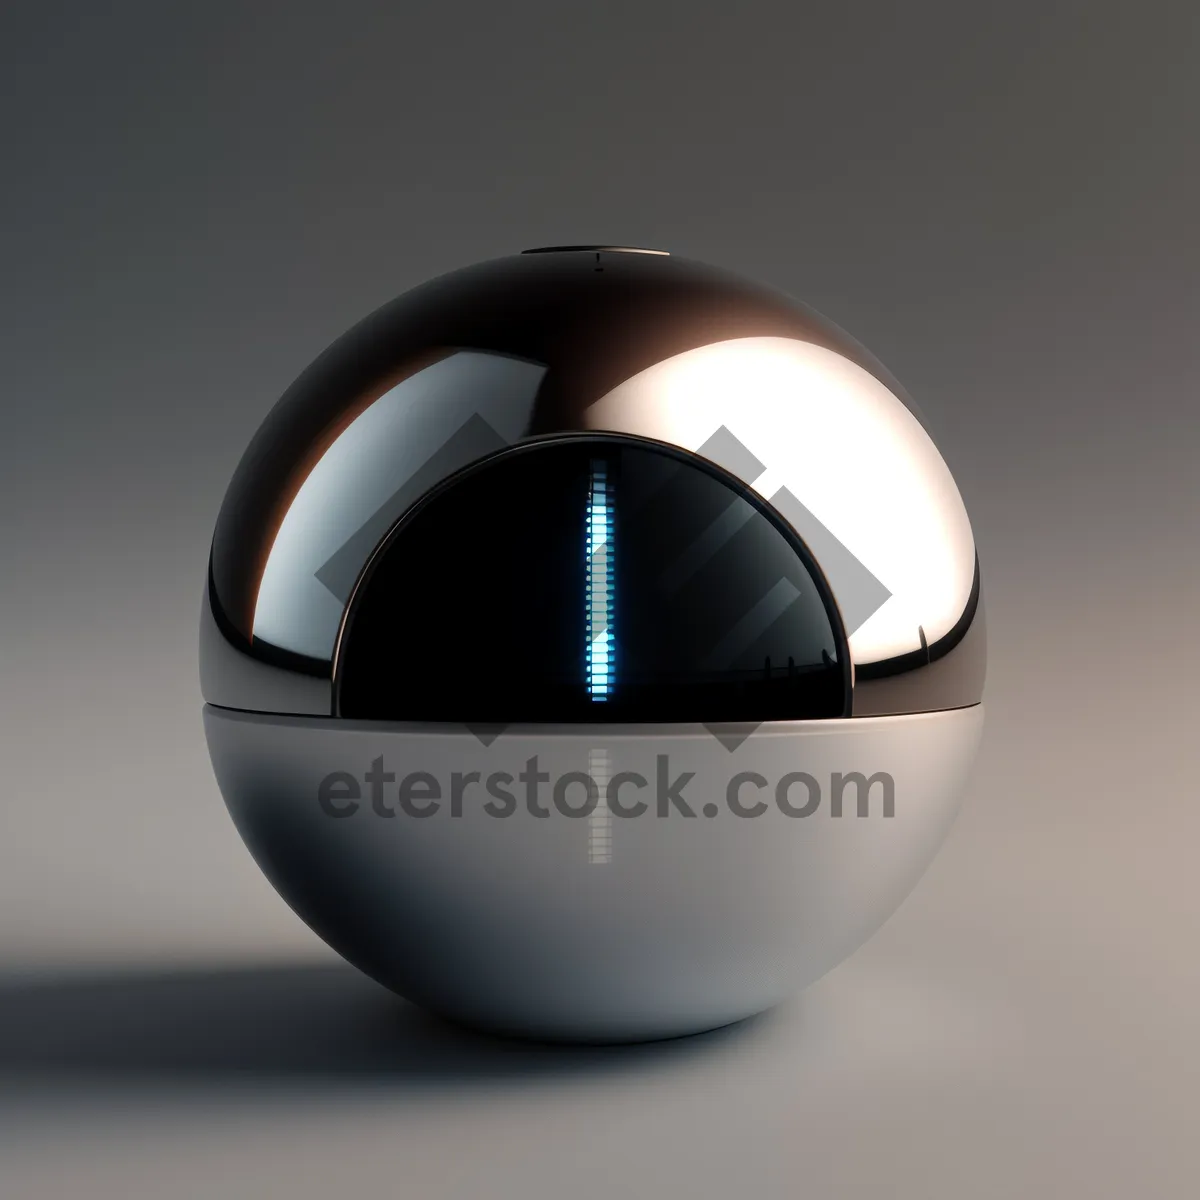 Picture of Shiny Glass Ball Icon in 3D Design